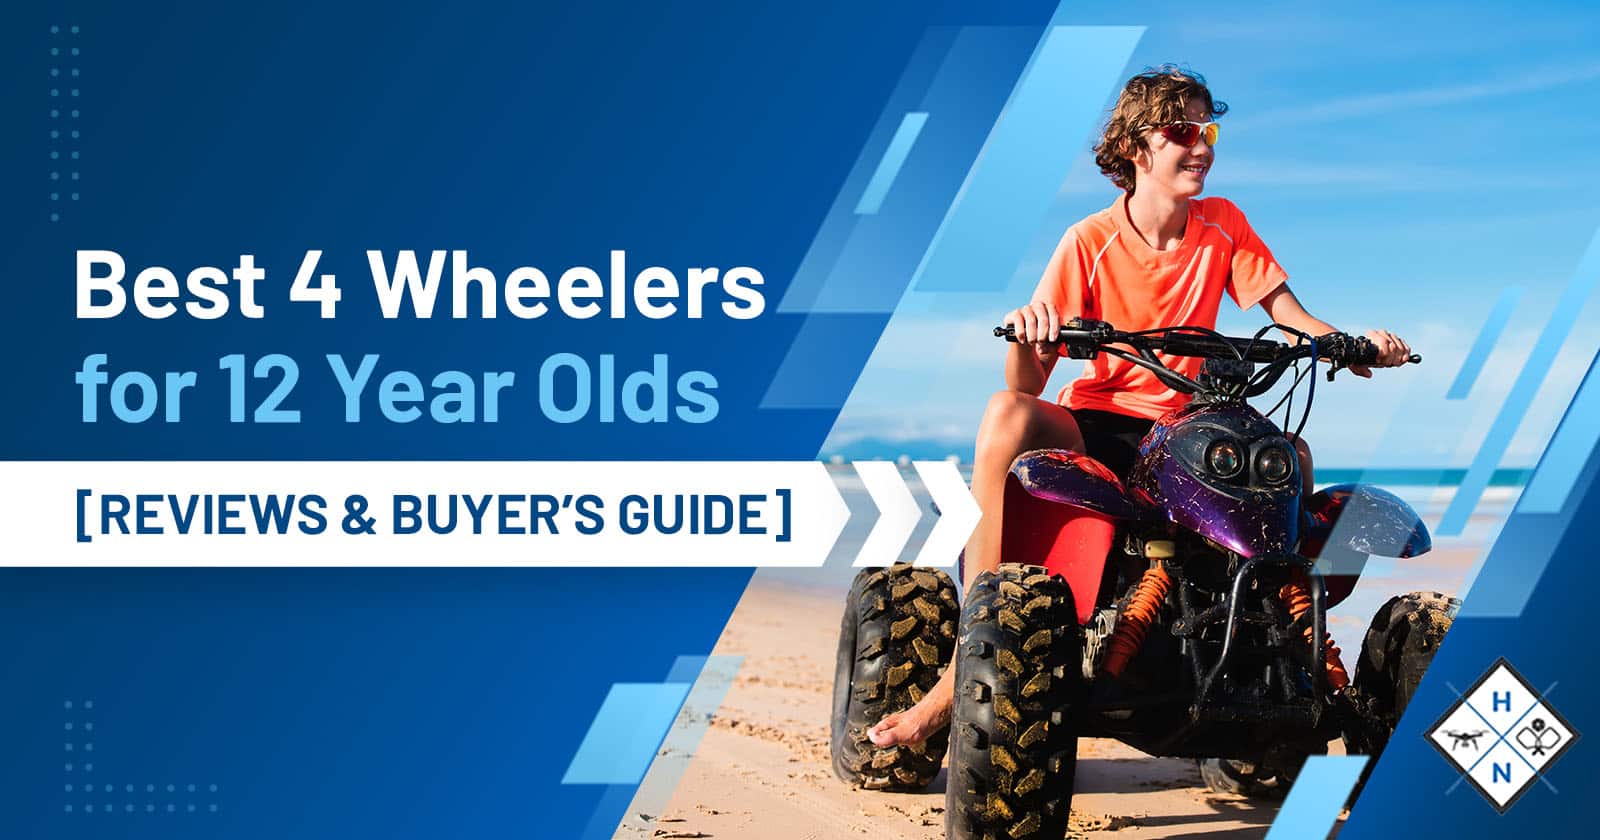 Best 4 Wheelers for 12 Year Olds [REVIEWS & BUYER'S GUIDE]